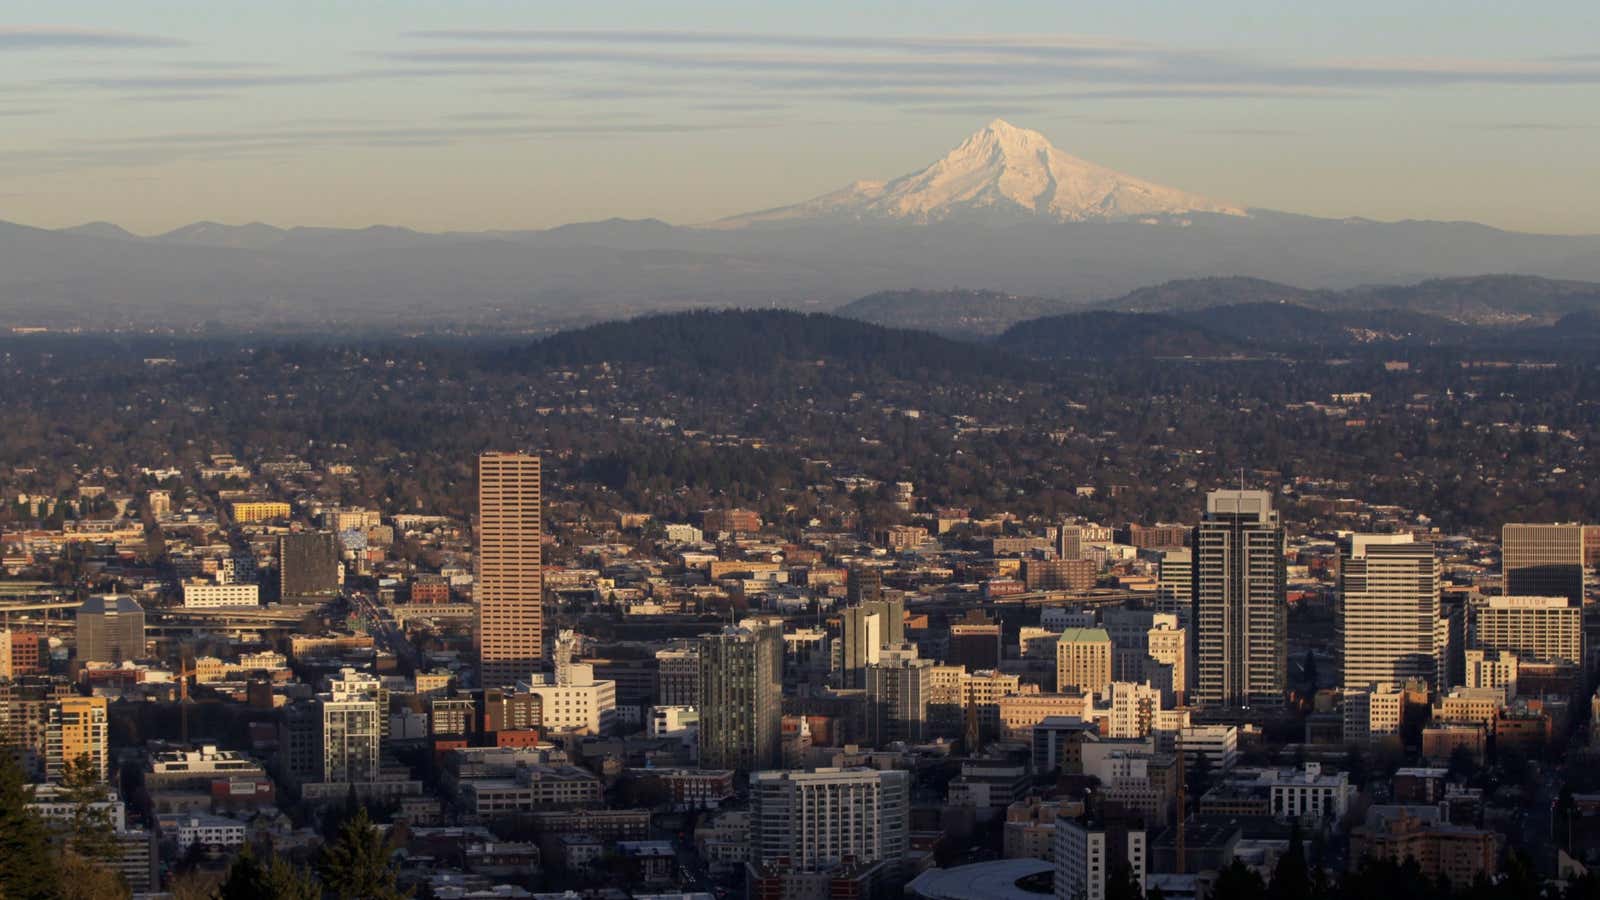 It’s Oregon! This is Portland, and Mount Hood.